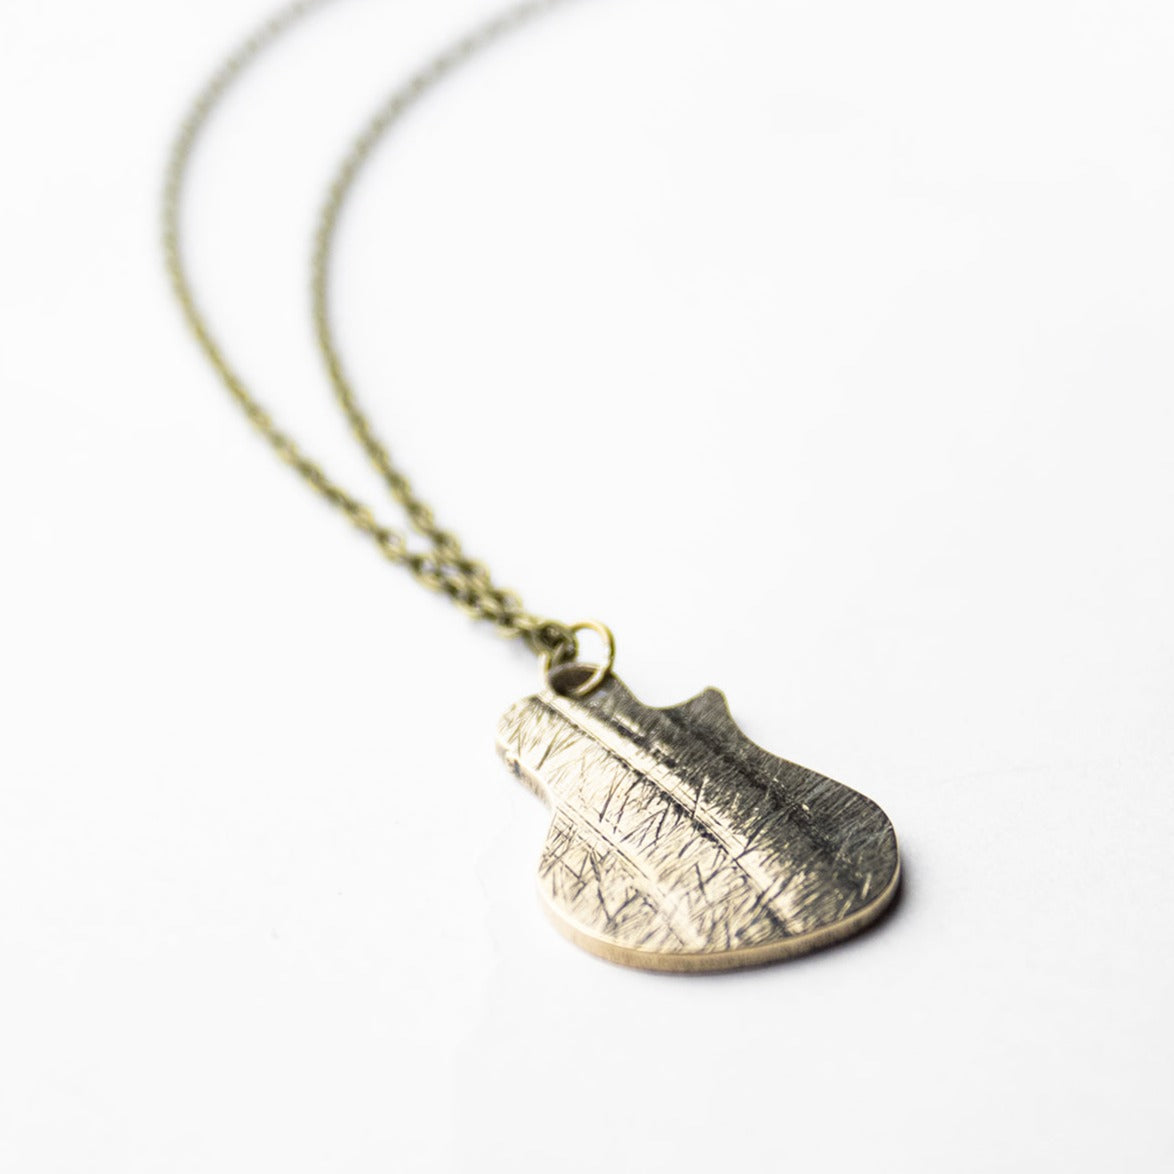 Les - Reclaimed Cymbal Necklace